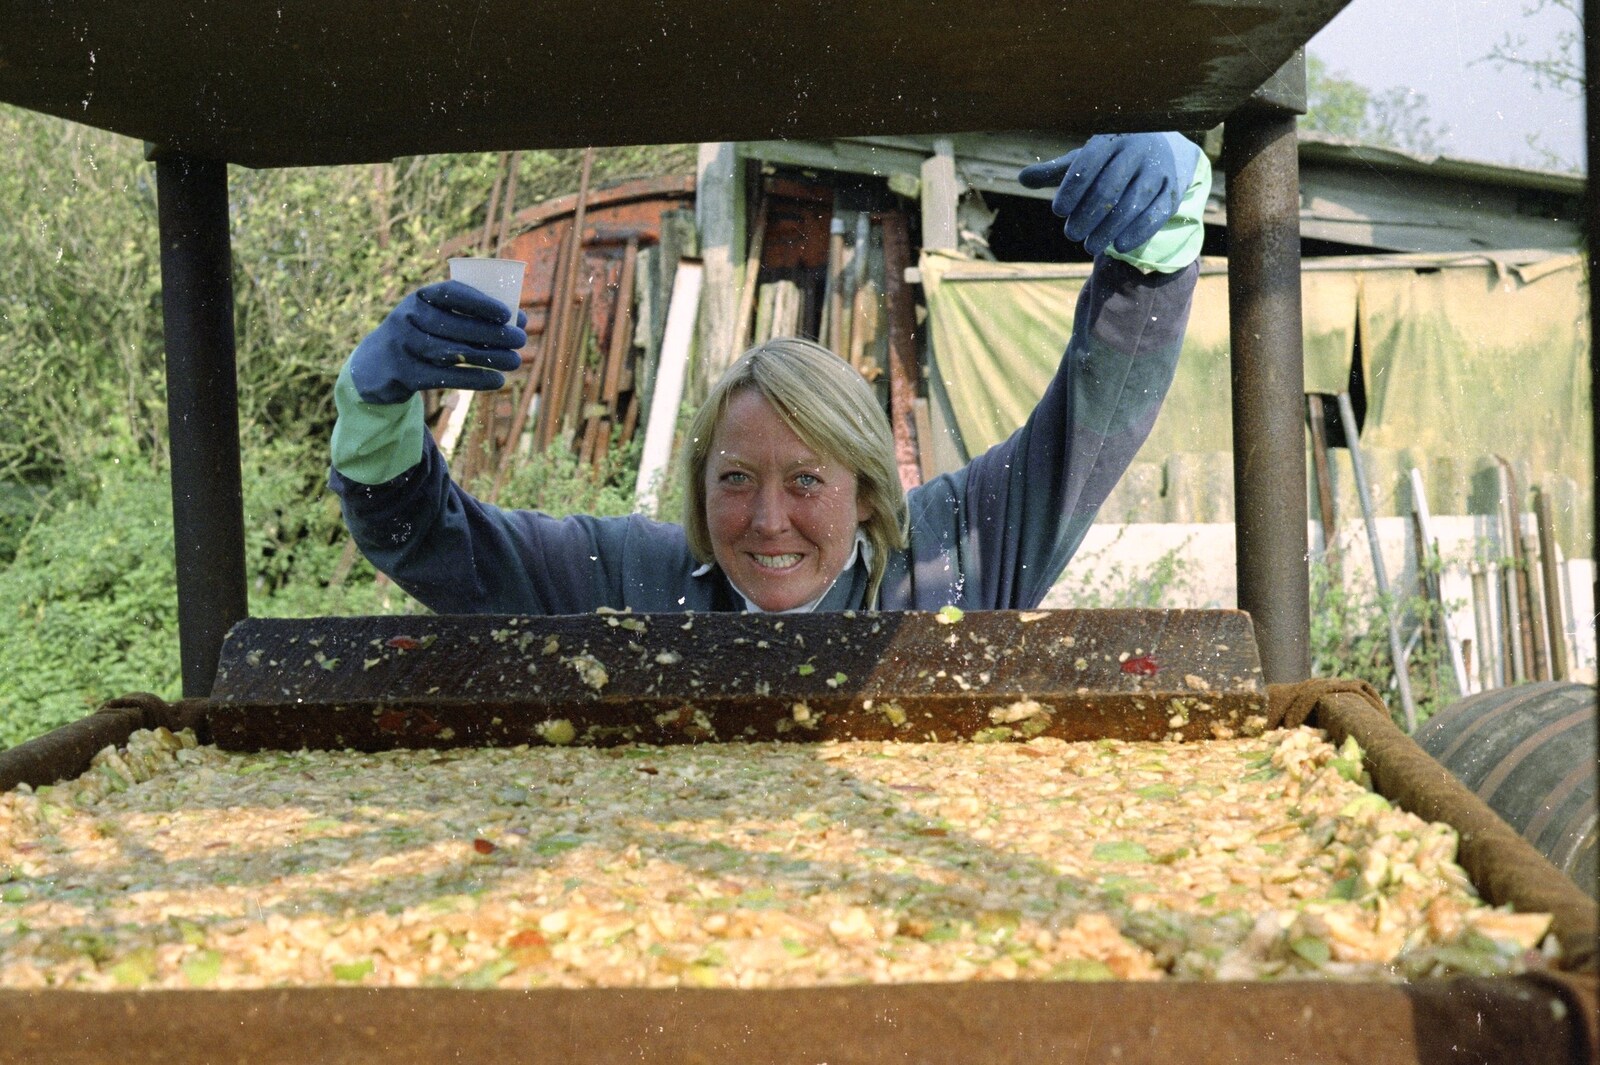 Cider Making (without Rosie), Stuston, Suffolk - 23rd September 1994: Mad Sue in action